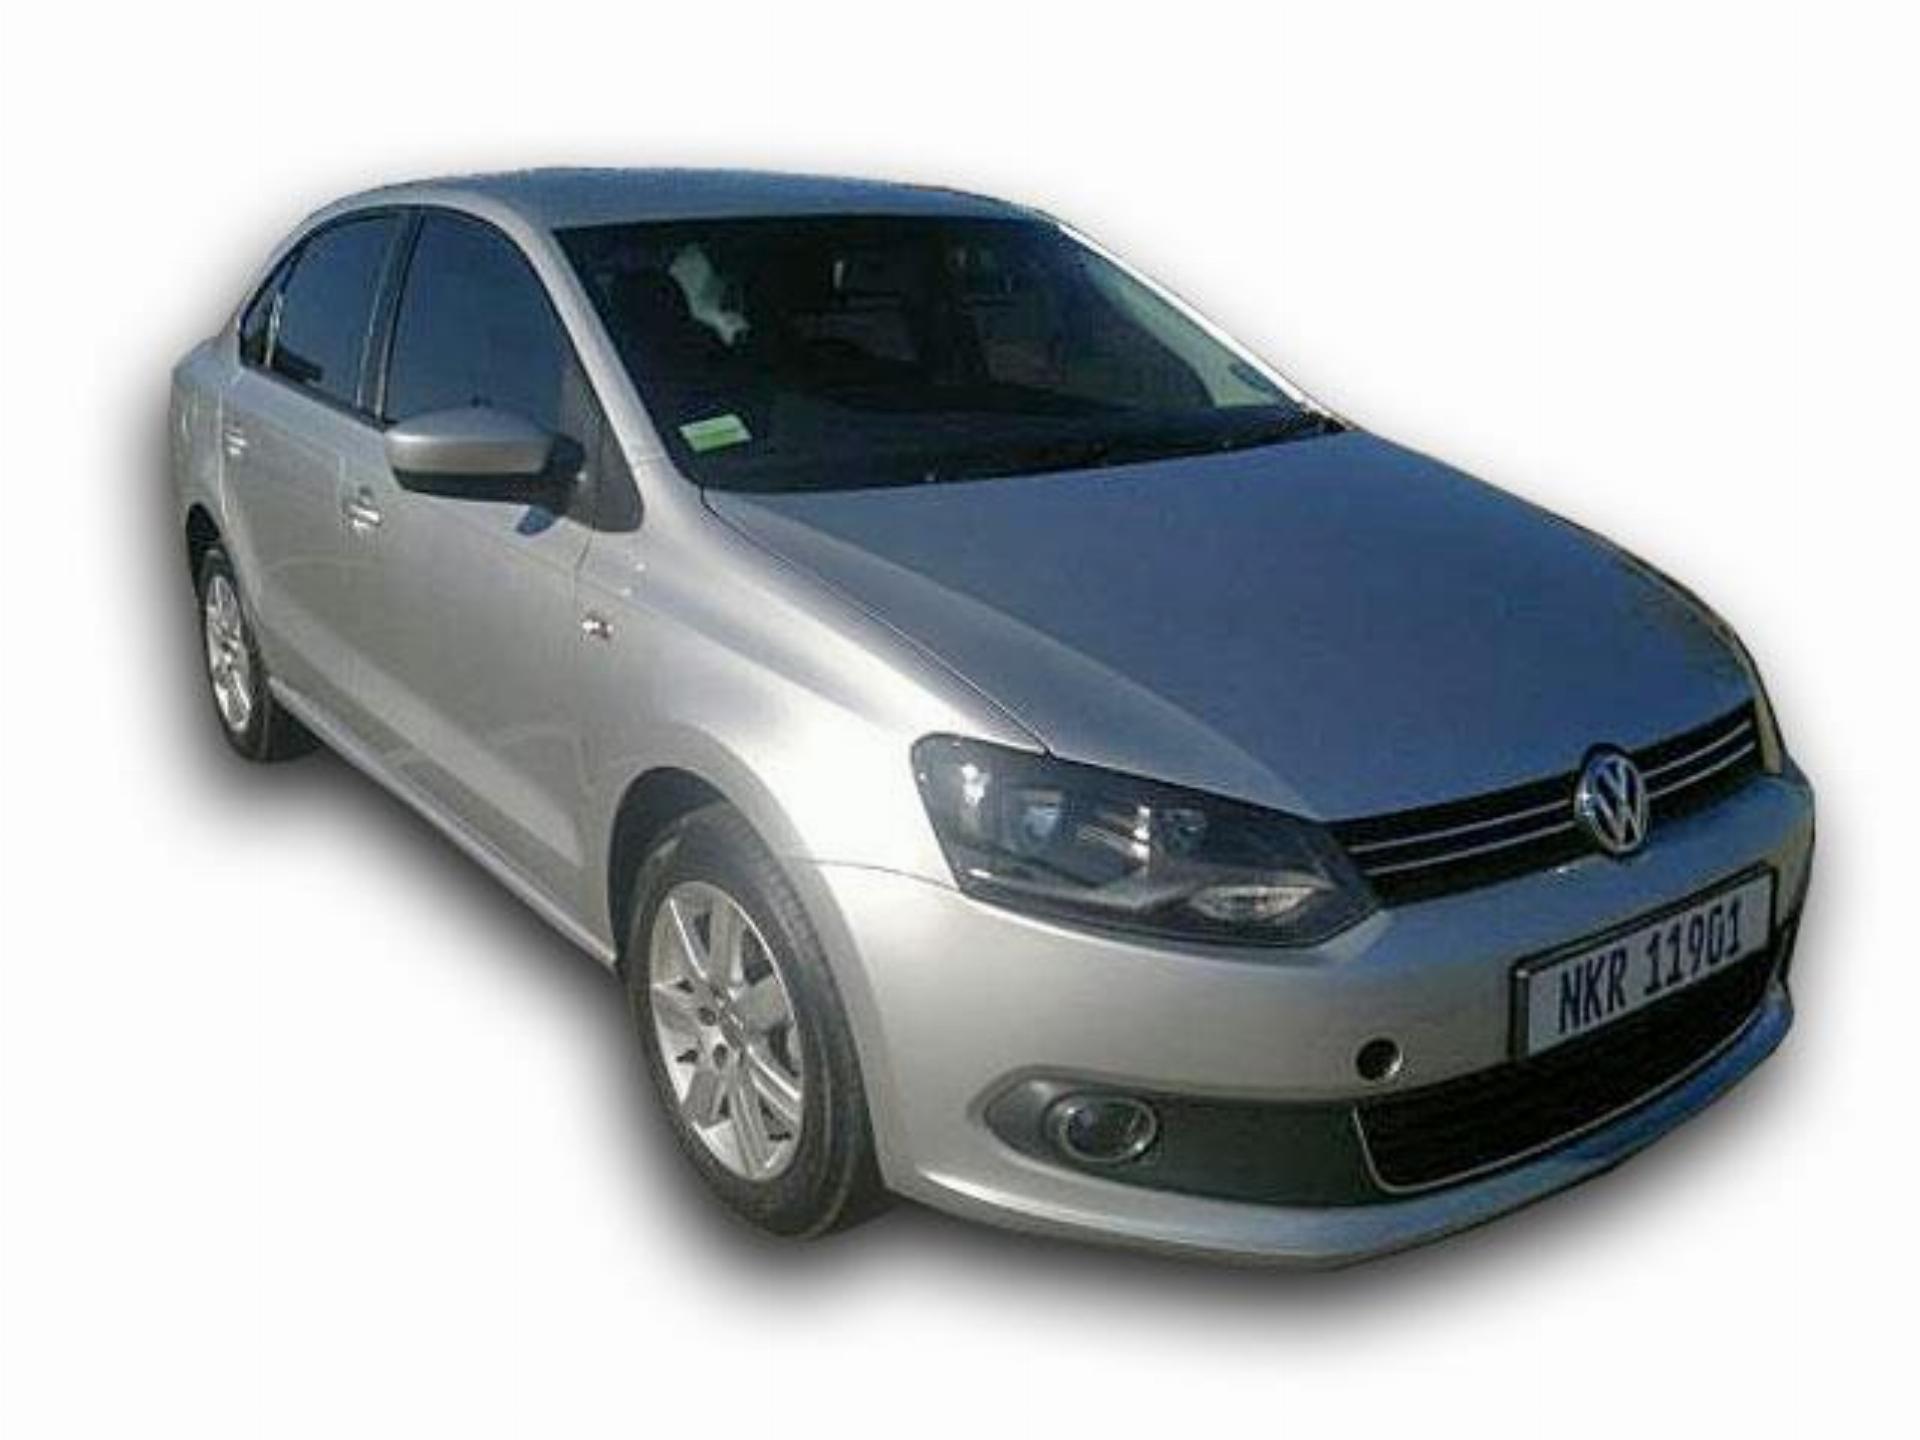 Used VW Polo 1.4 Comfortline 2013 on auction PV1022422